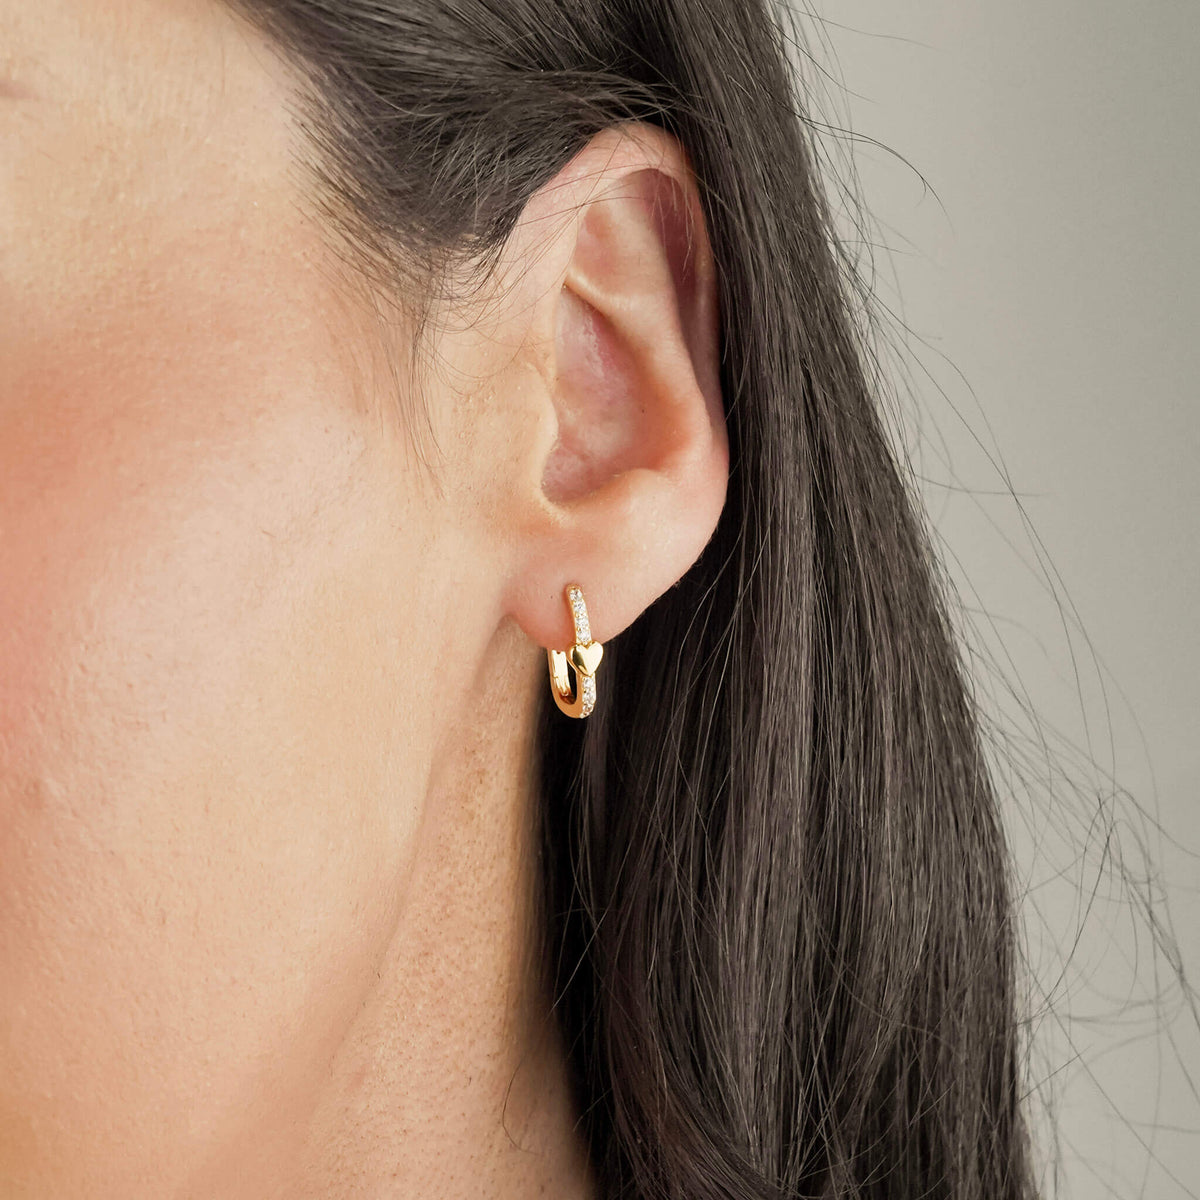 unique earrings with a dainty gold heart amid white zirconia stones. These hoop earrings have a unique shape. 